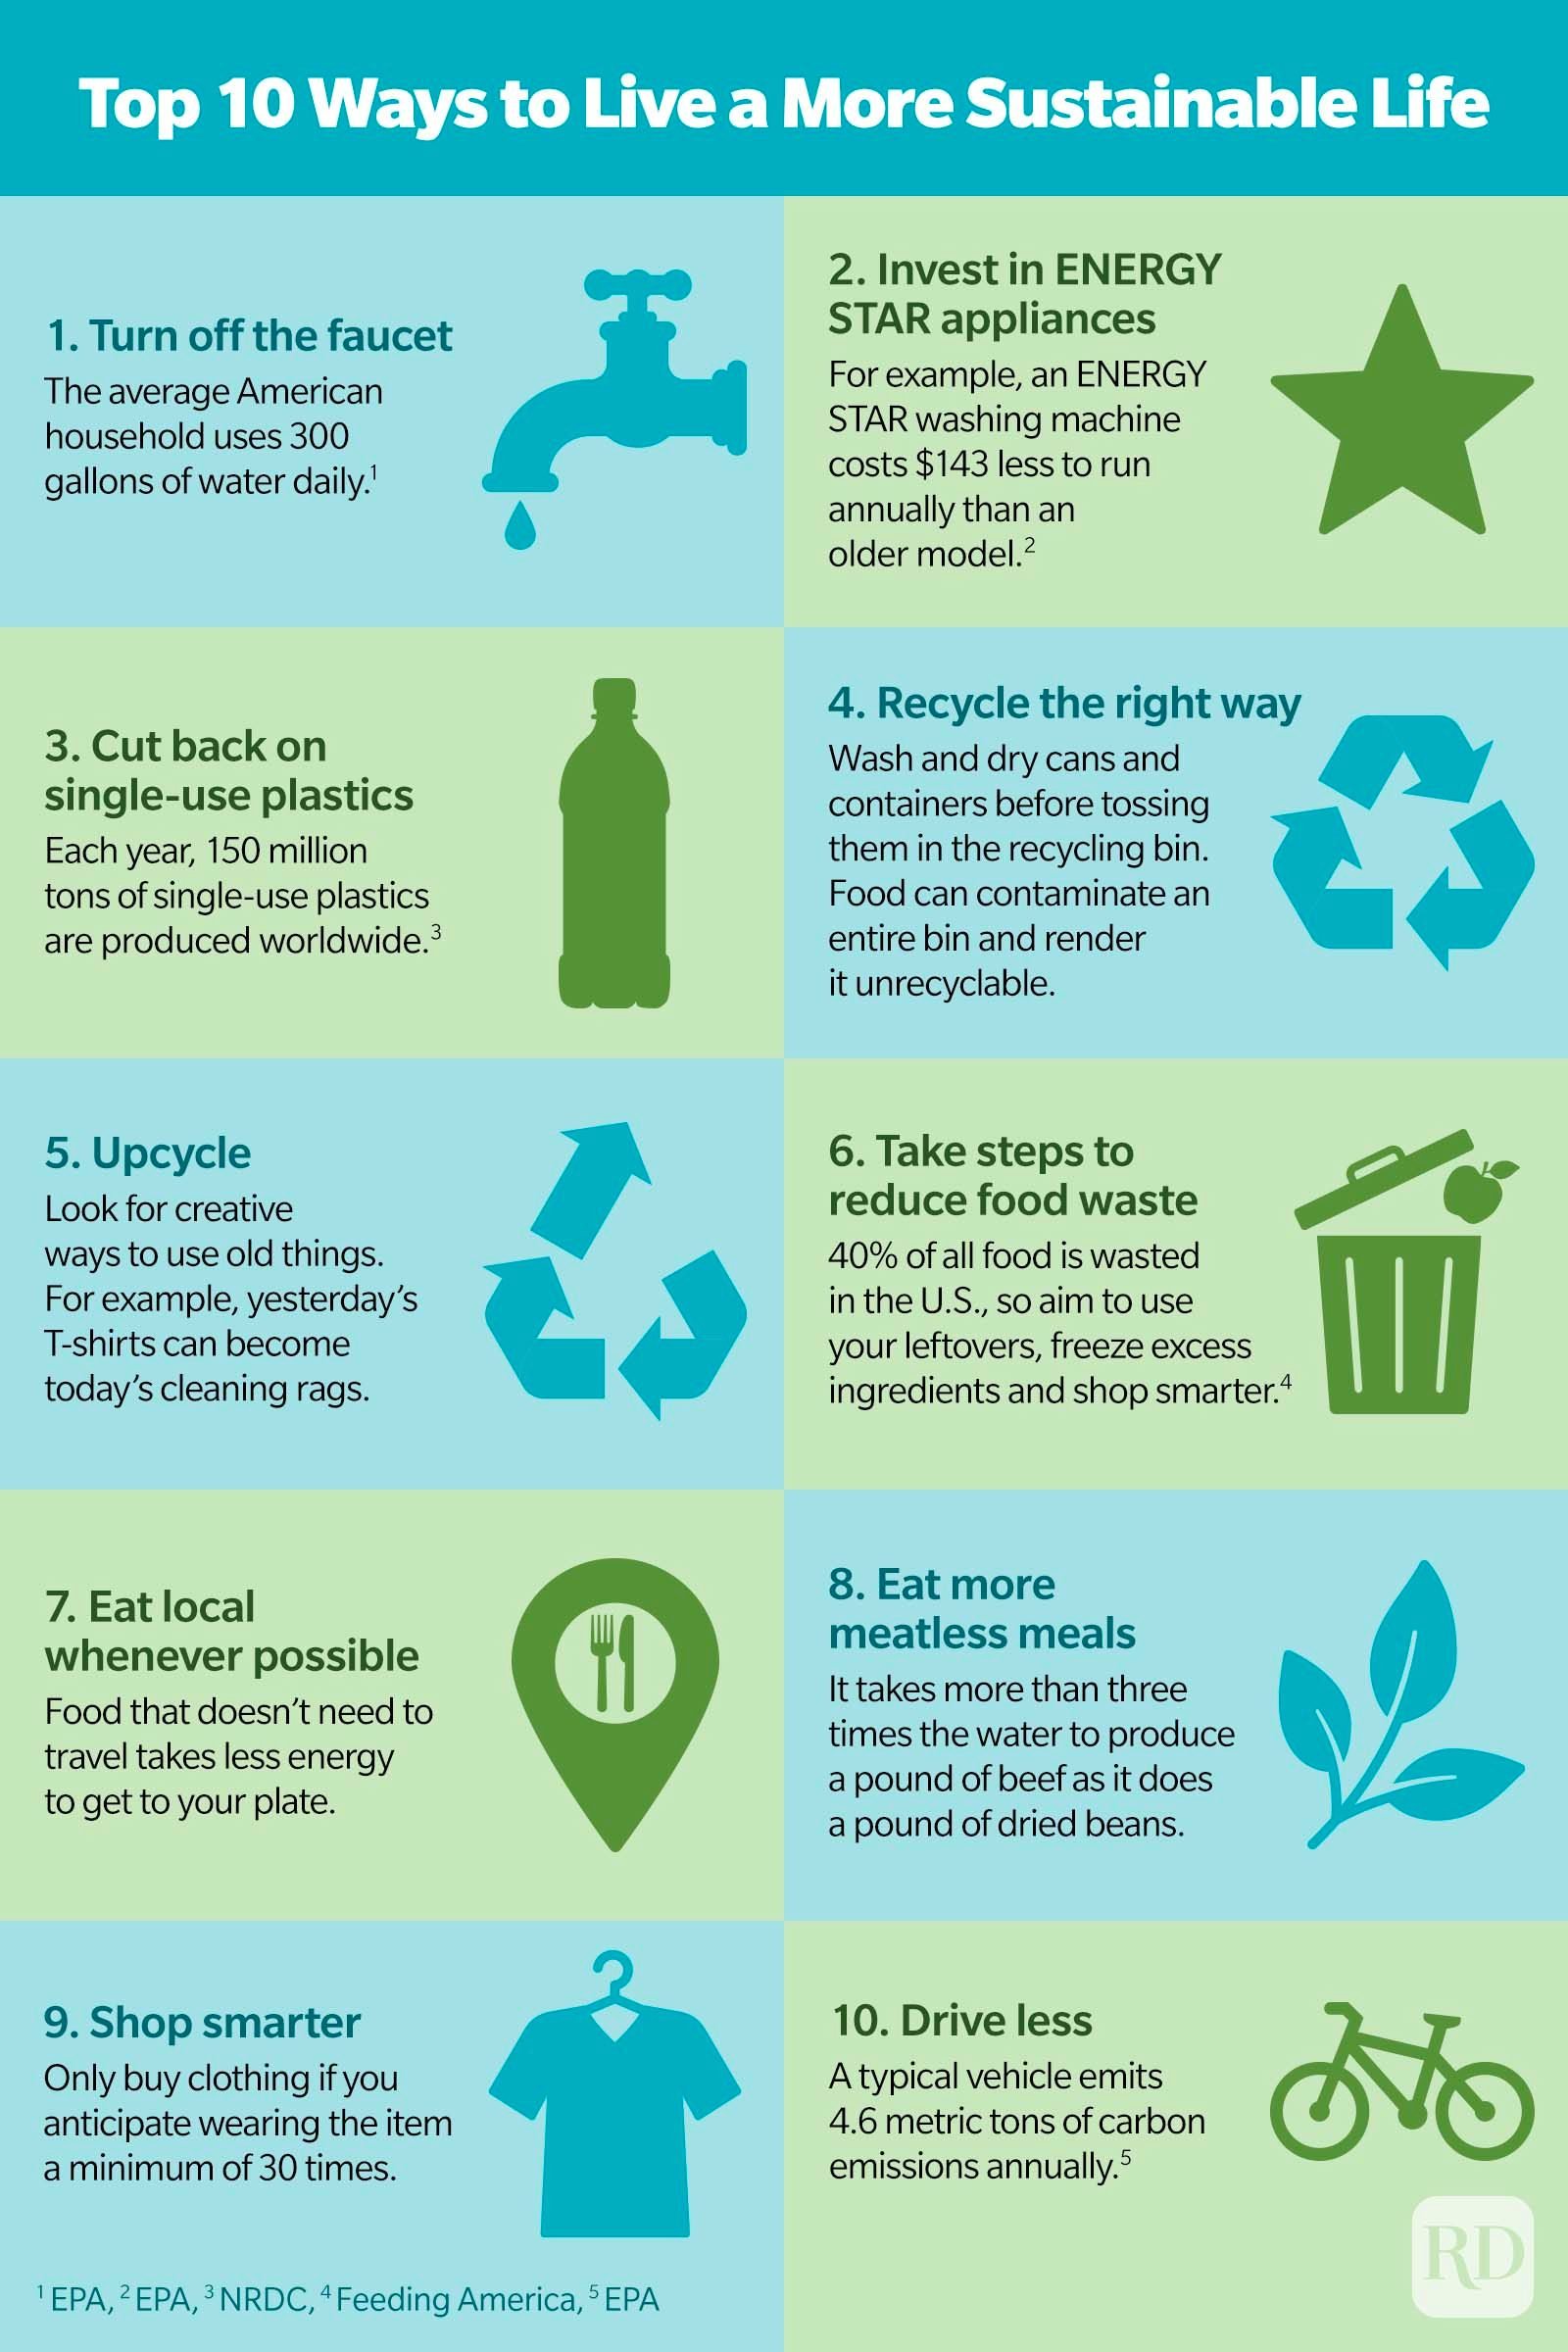 Top 10 Ways To Live A More Sustainable Life Infographic GettyImages10 